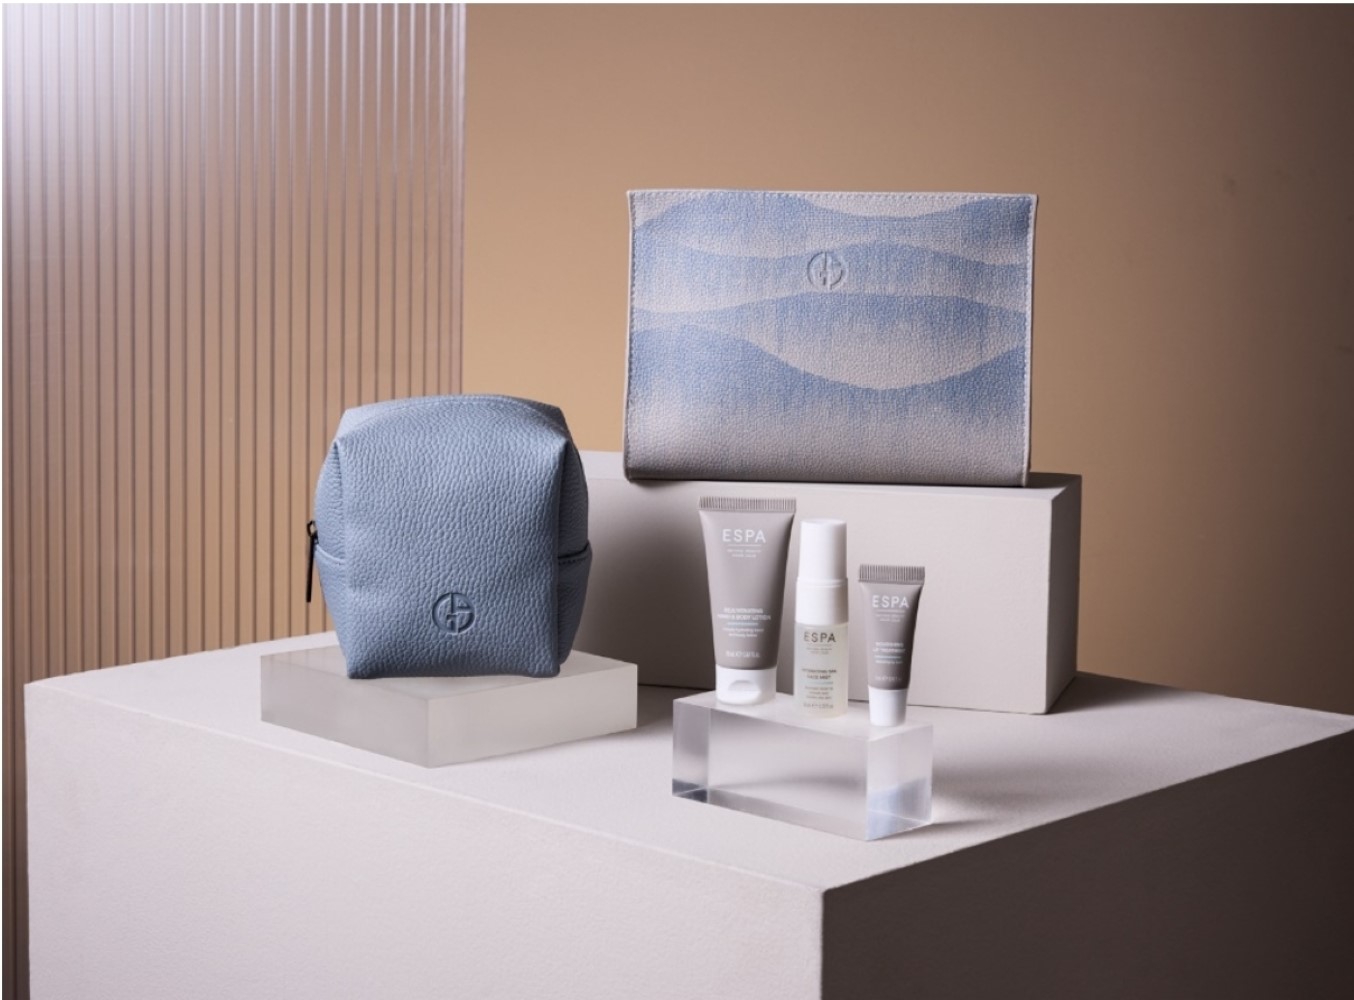 Etihad Introduces Largest Amenity Kits in the Skies by Giorgio Armani